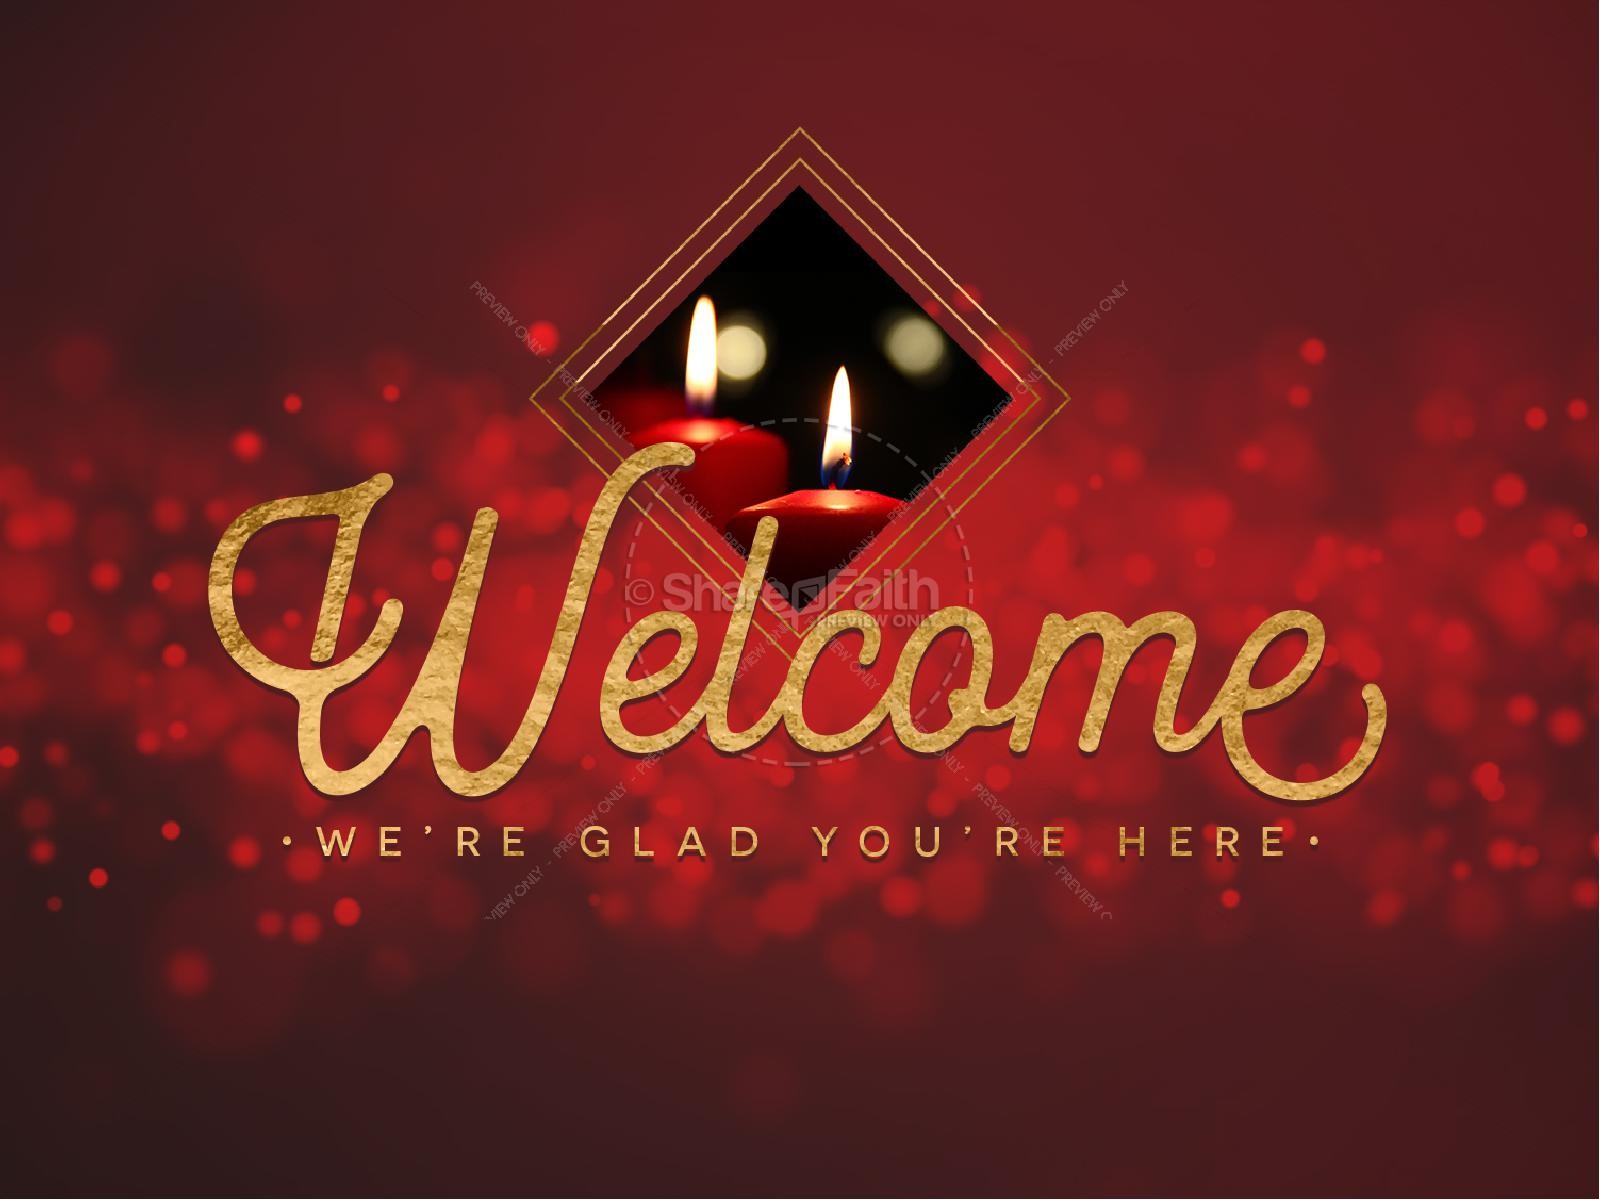 Christmas Church Services PowerPoint Template Thumbnail 2